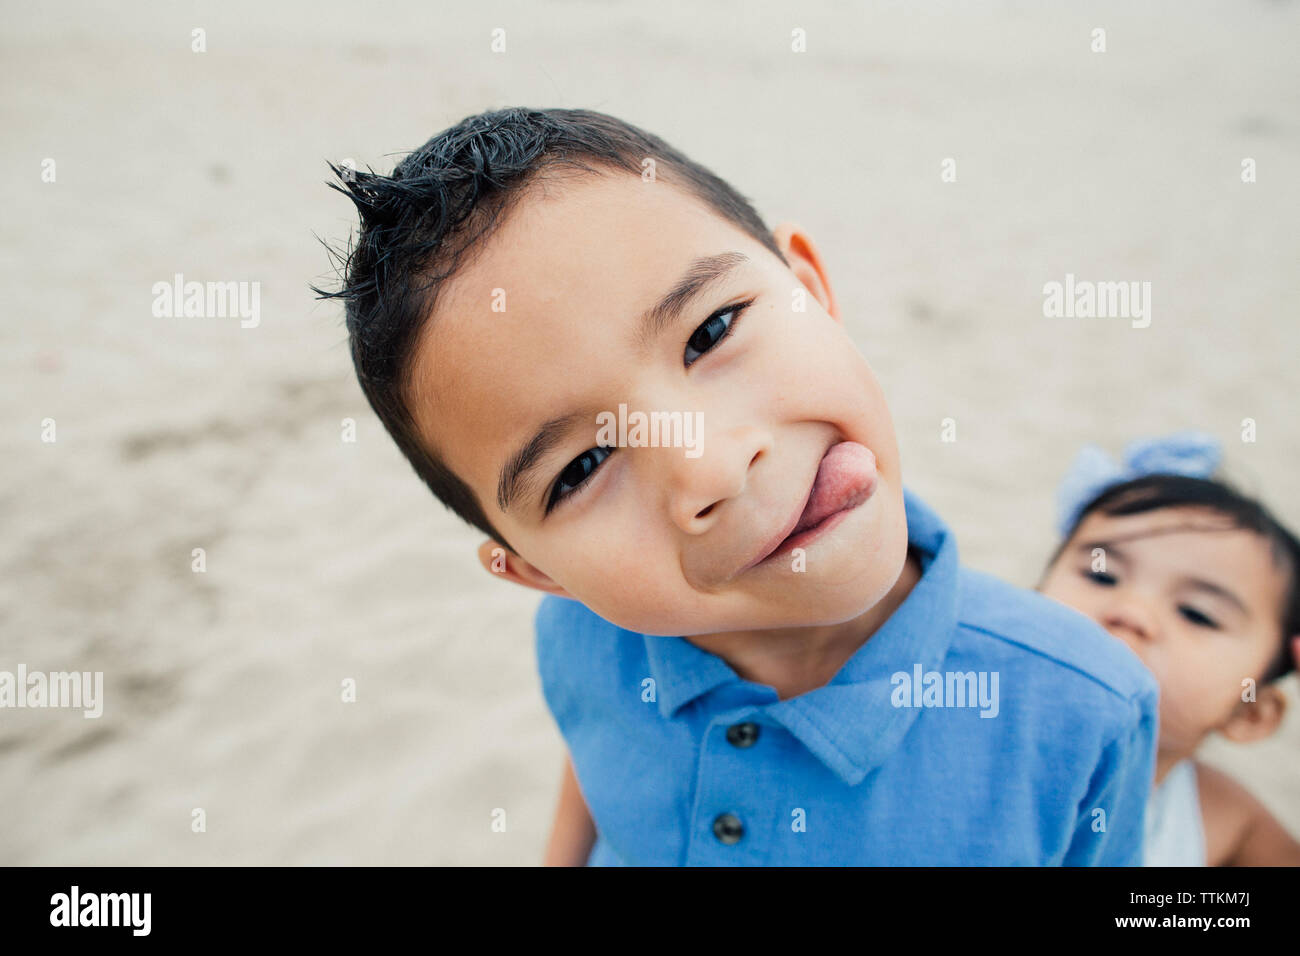 Little Boy Sticks Tongue Out For A Silly Portrait Stock Photo